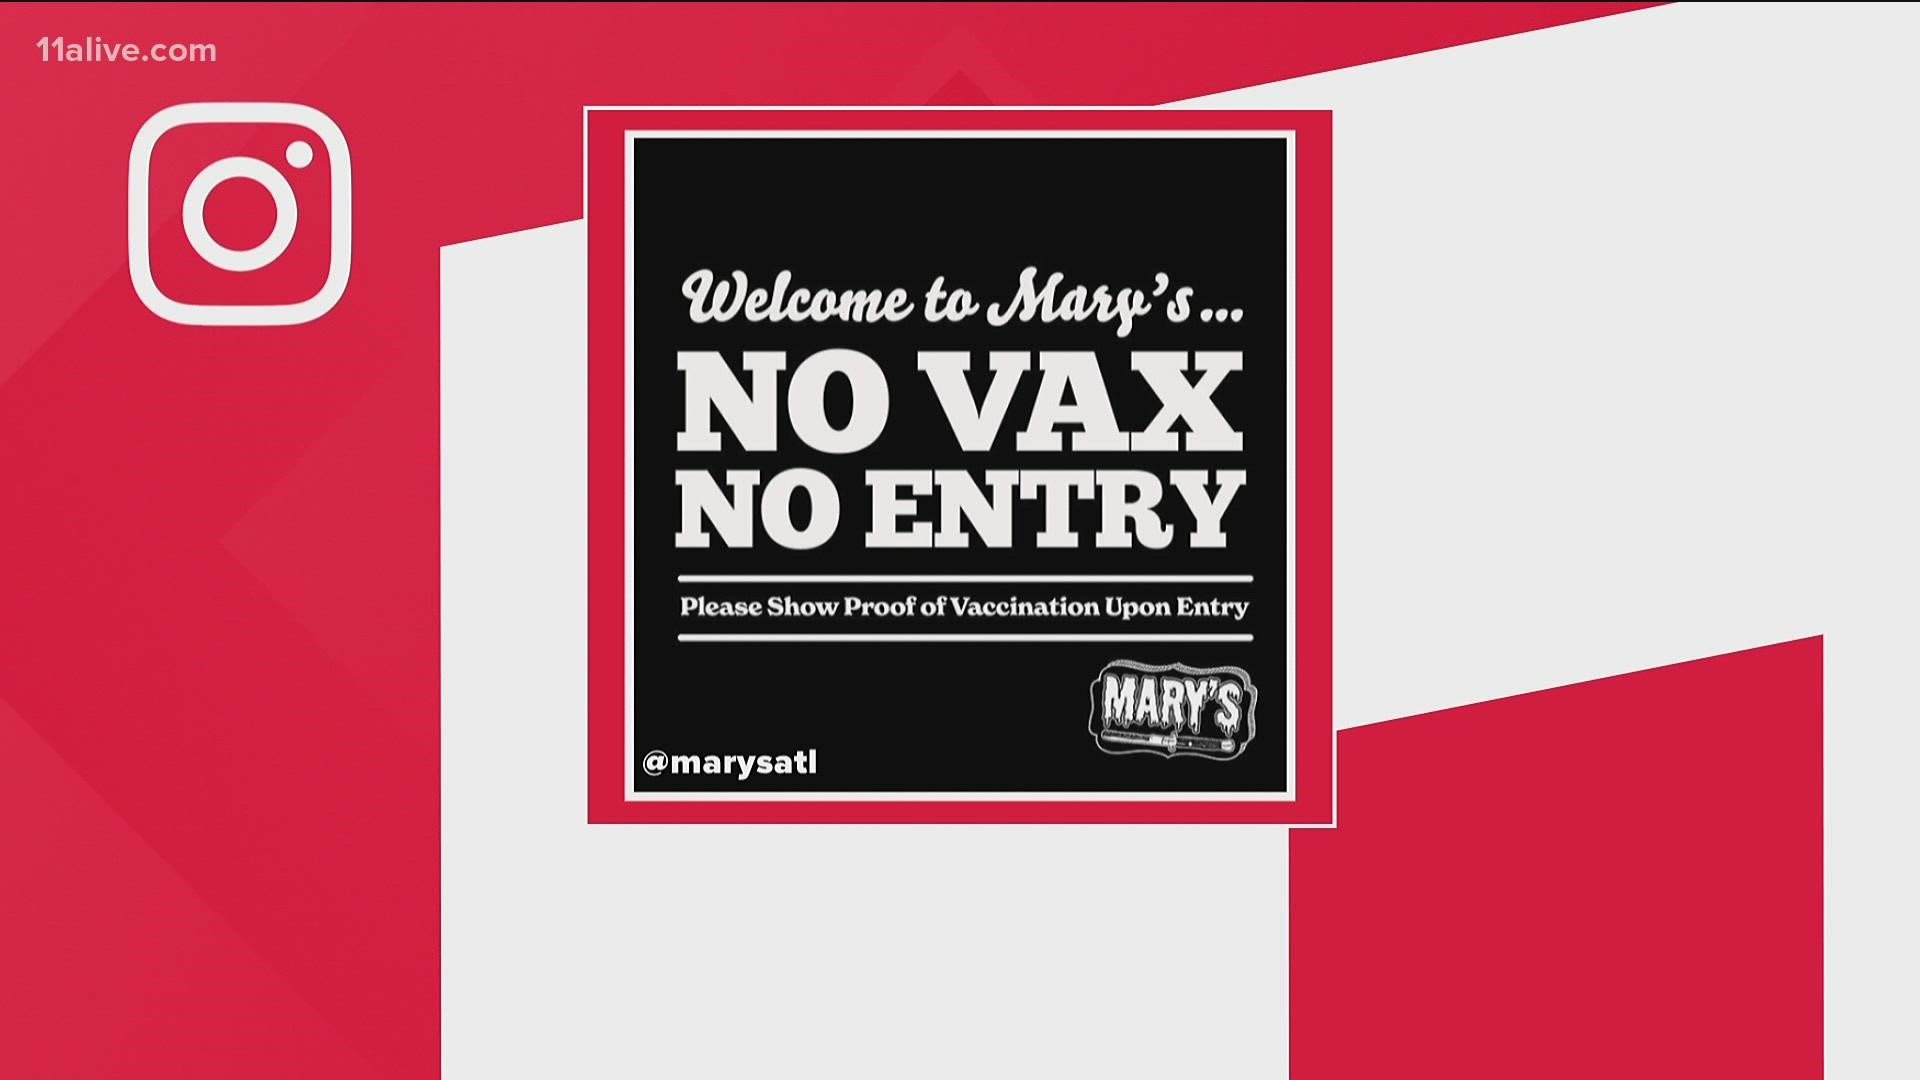 Mary's, which bills itself as 'America's favorite gay bar' said on Instagram it will ask patrons to show proof of vaccination upon entry.